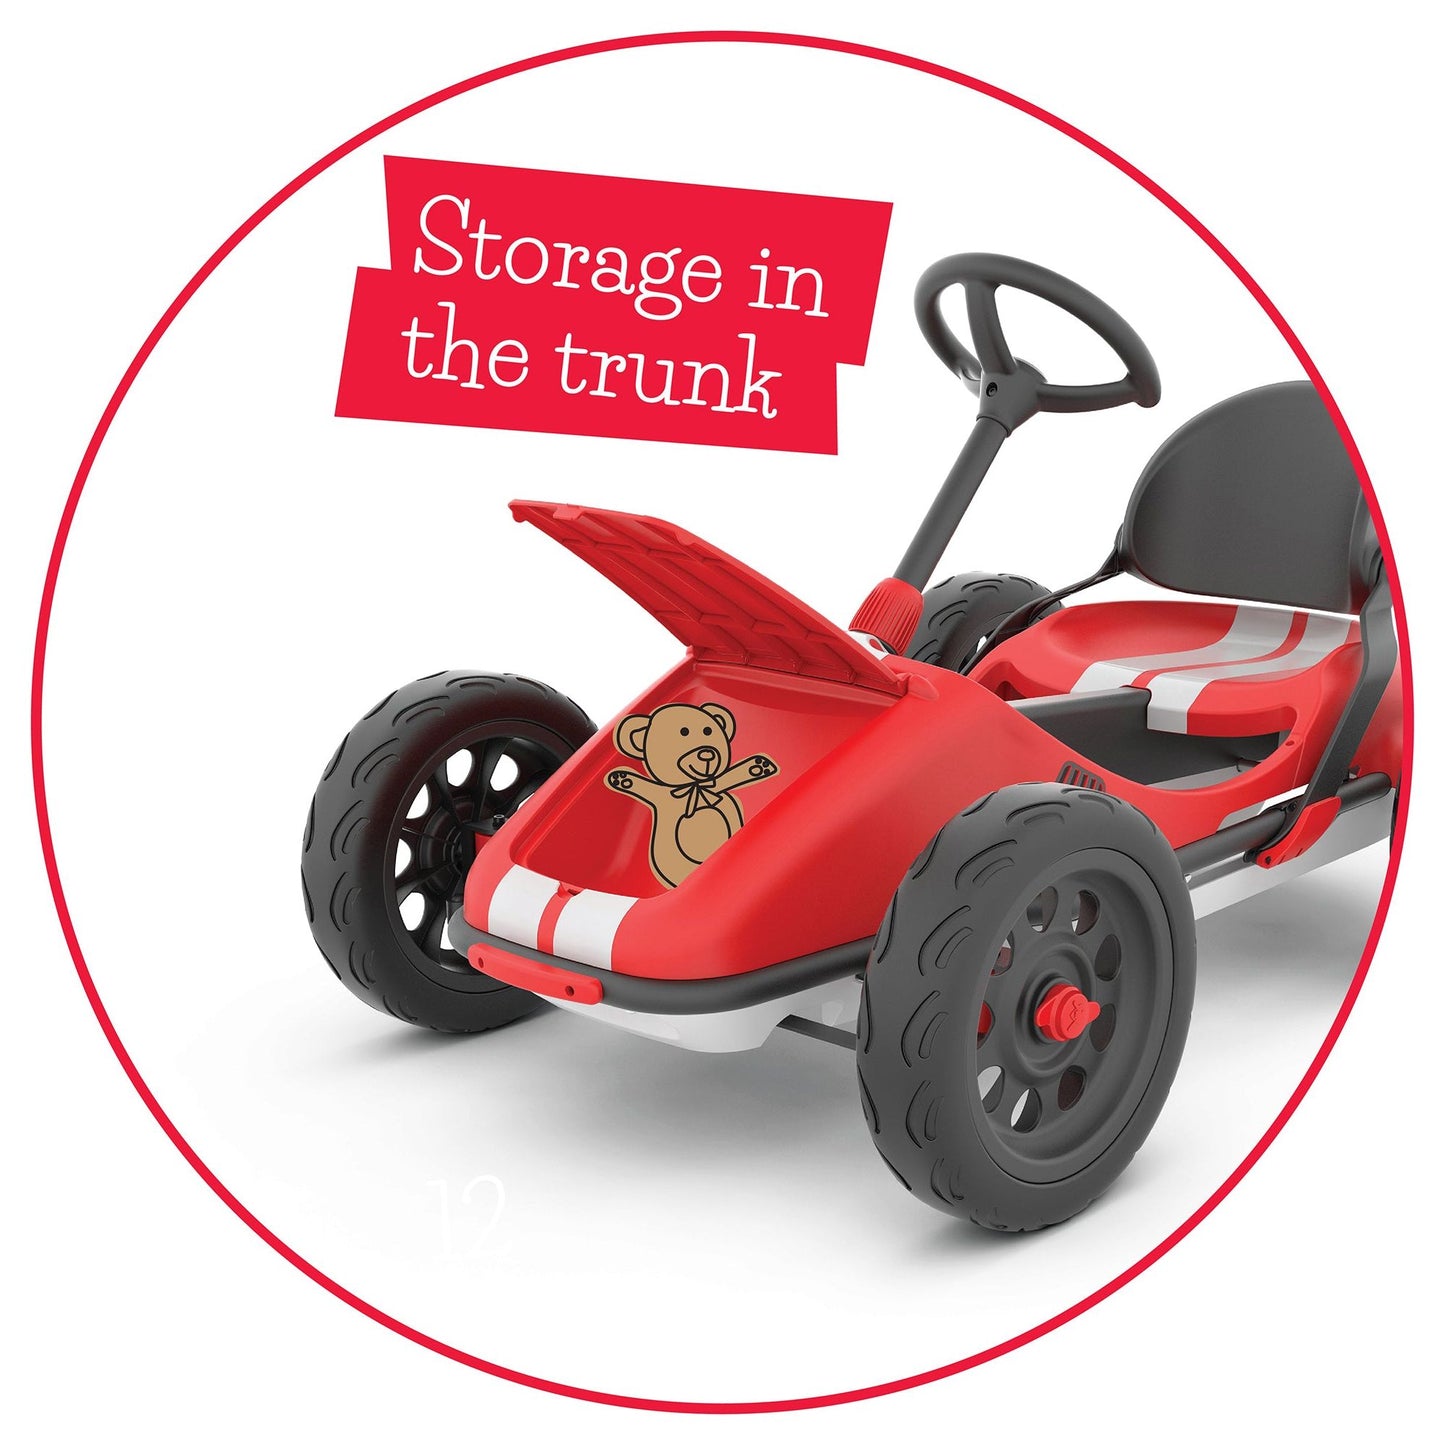 Chillafish Kids Go Kart Monzi - Red with storage in the trunk